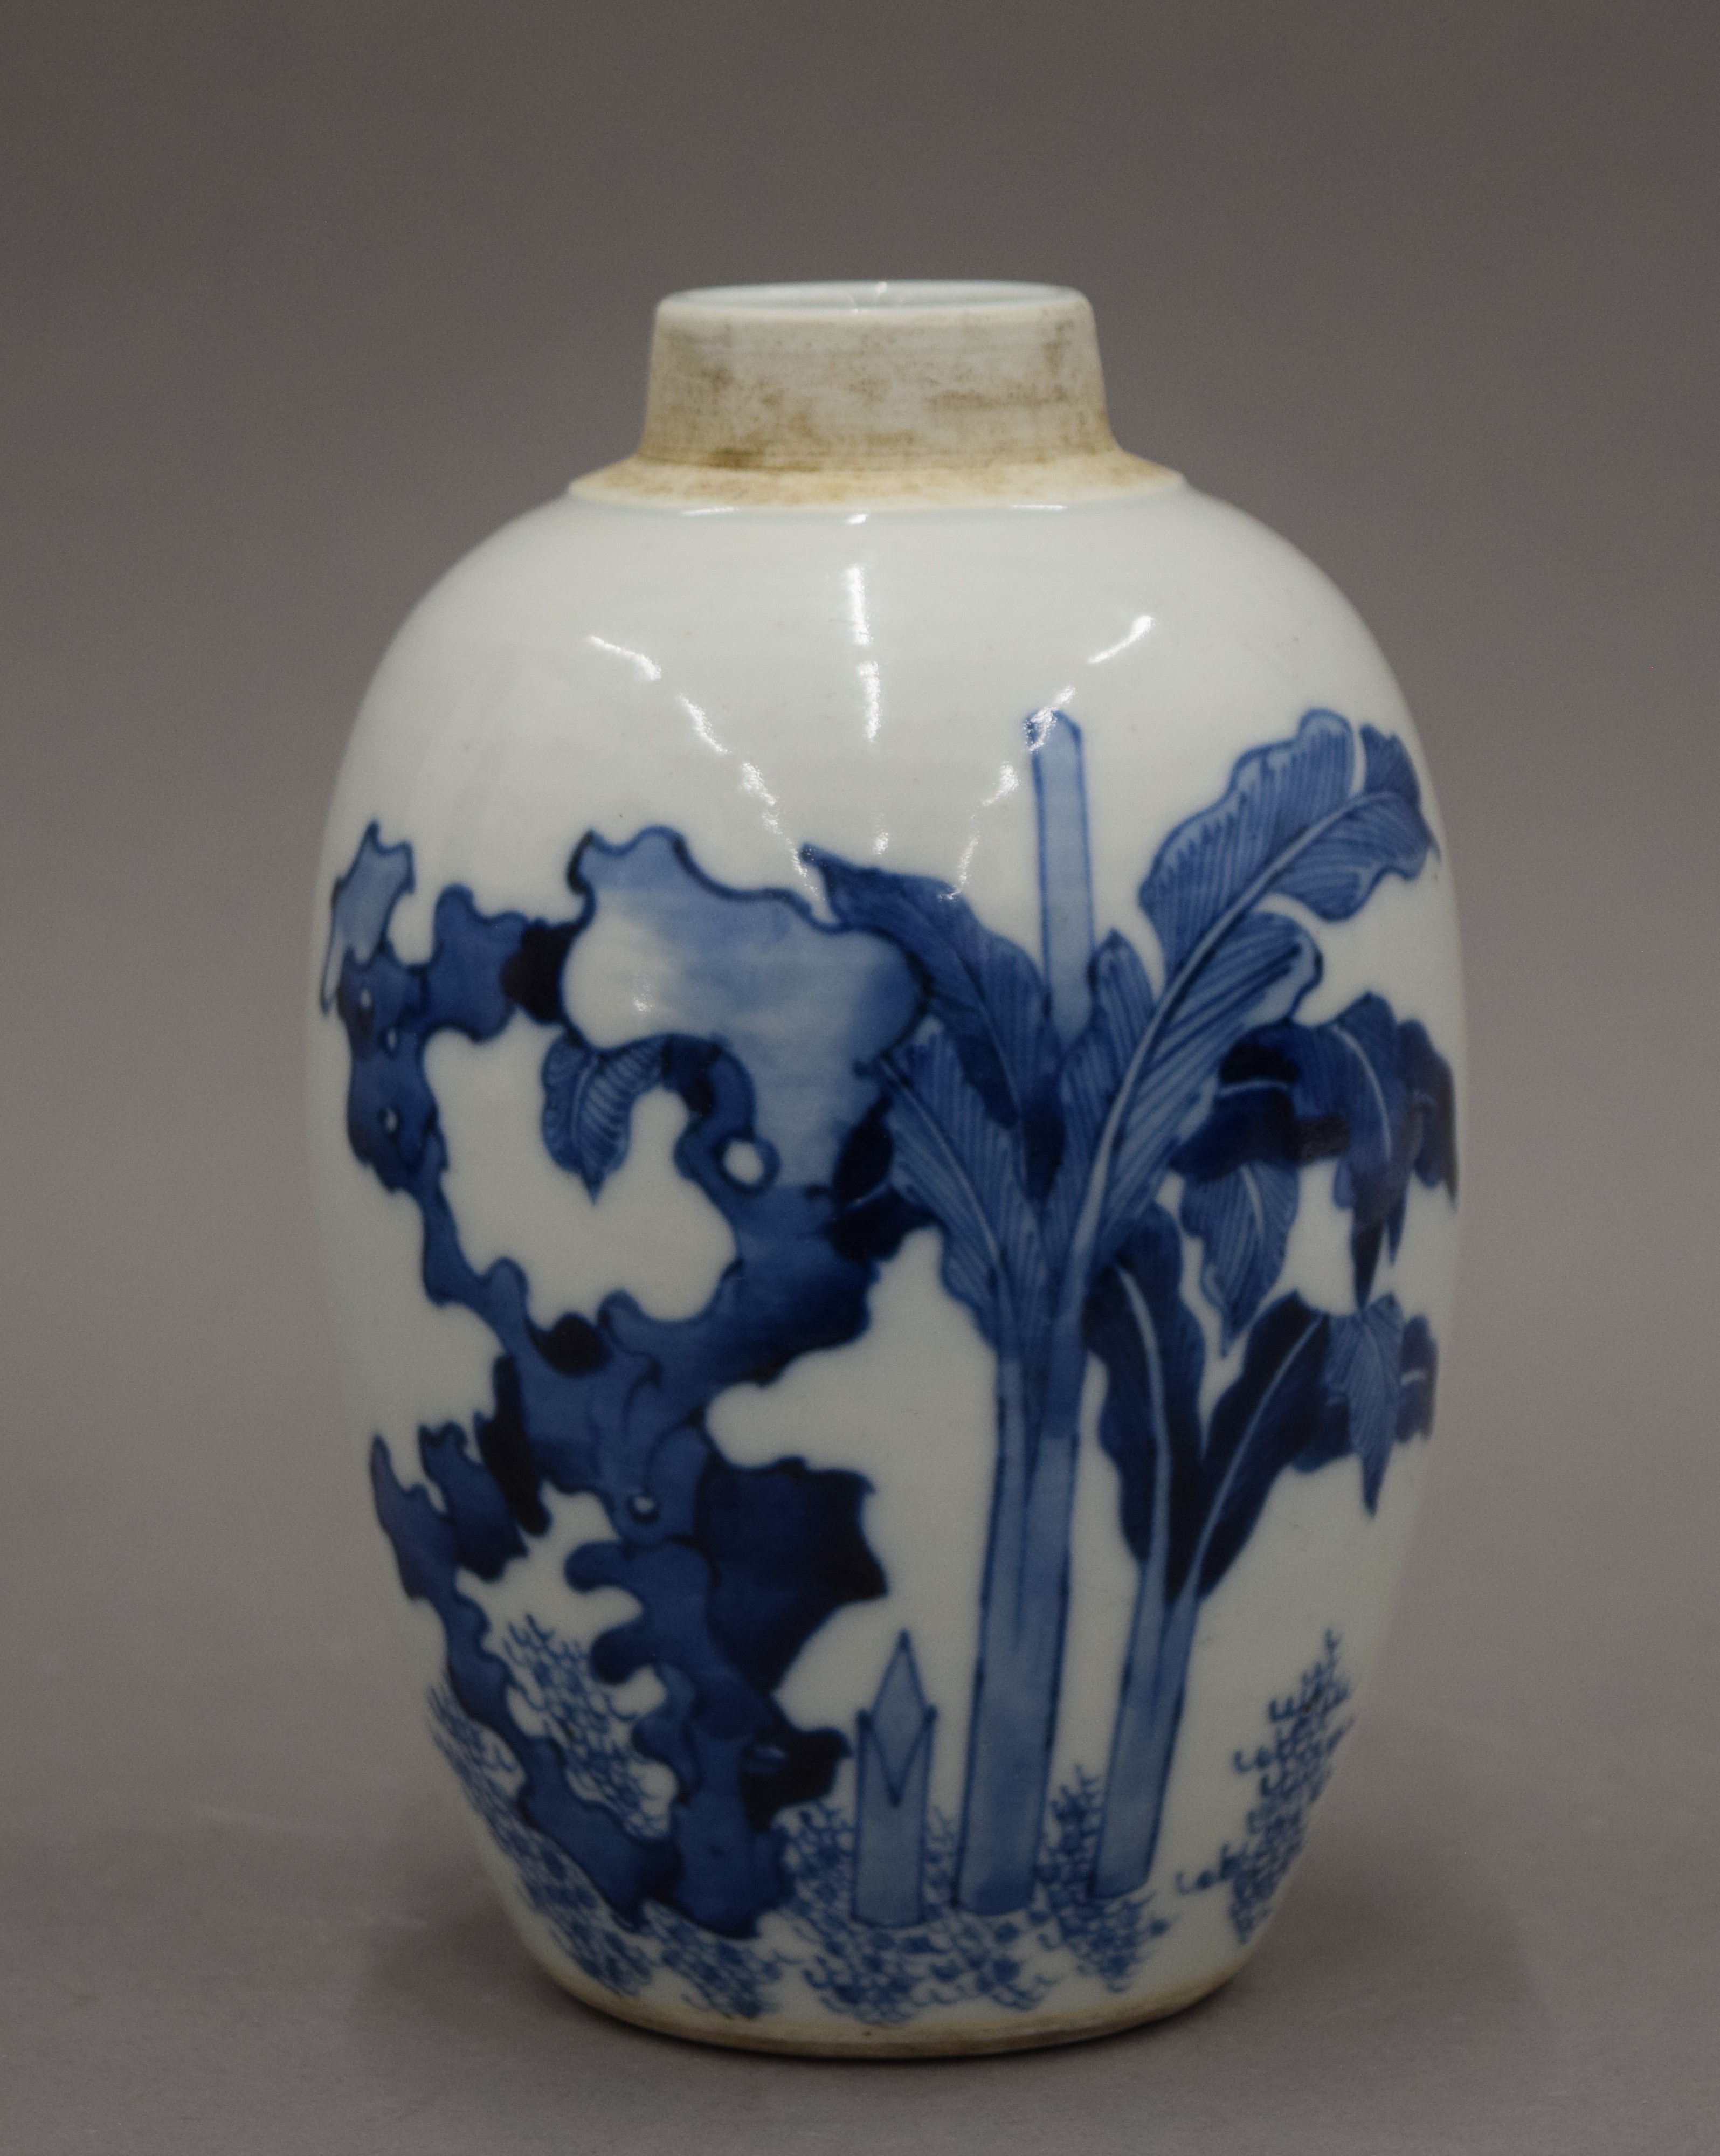 An 18th century Chinese blue and white porcelain tea caddy. 15 cm high. - Image 4 of 7